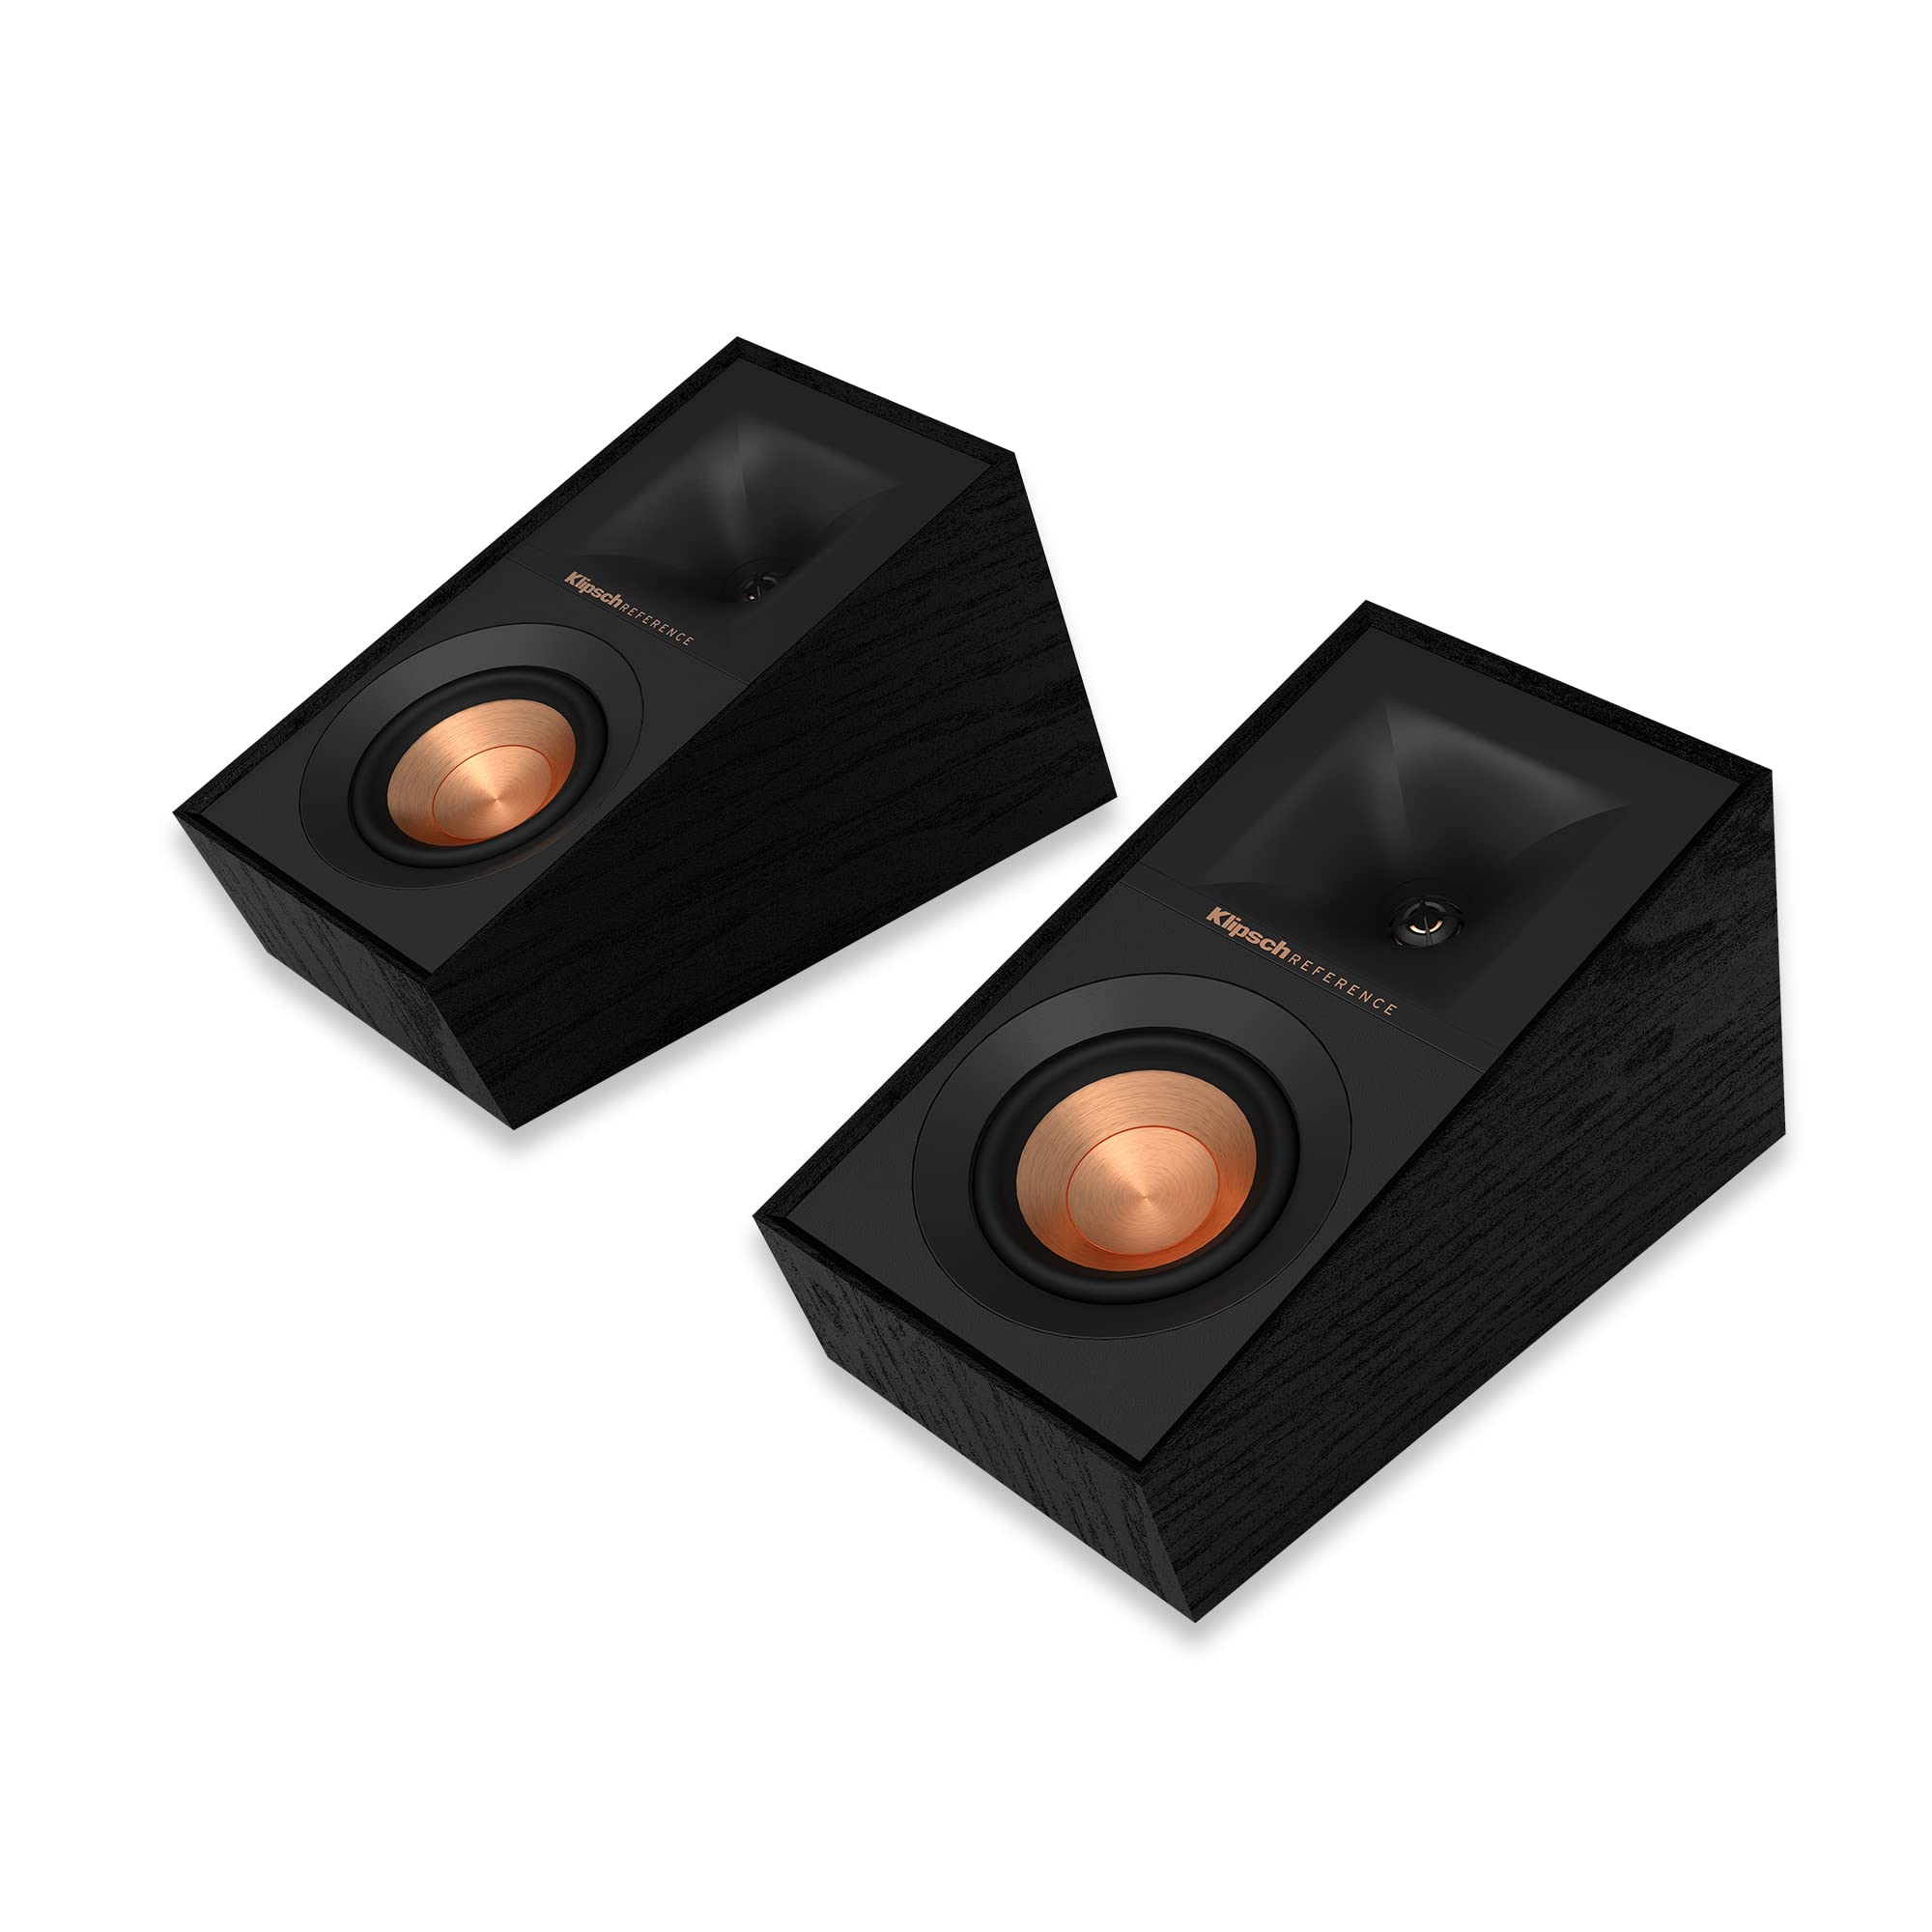 Klipsch Reference Next Generation R-40SA Dolby Atmos High-Performance, Horn-Loaded Elevation Surround Speaker Pair for Best-in-Class Immersive Home Theater in Black